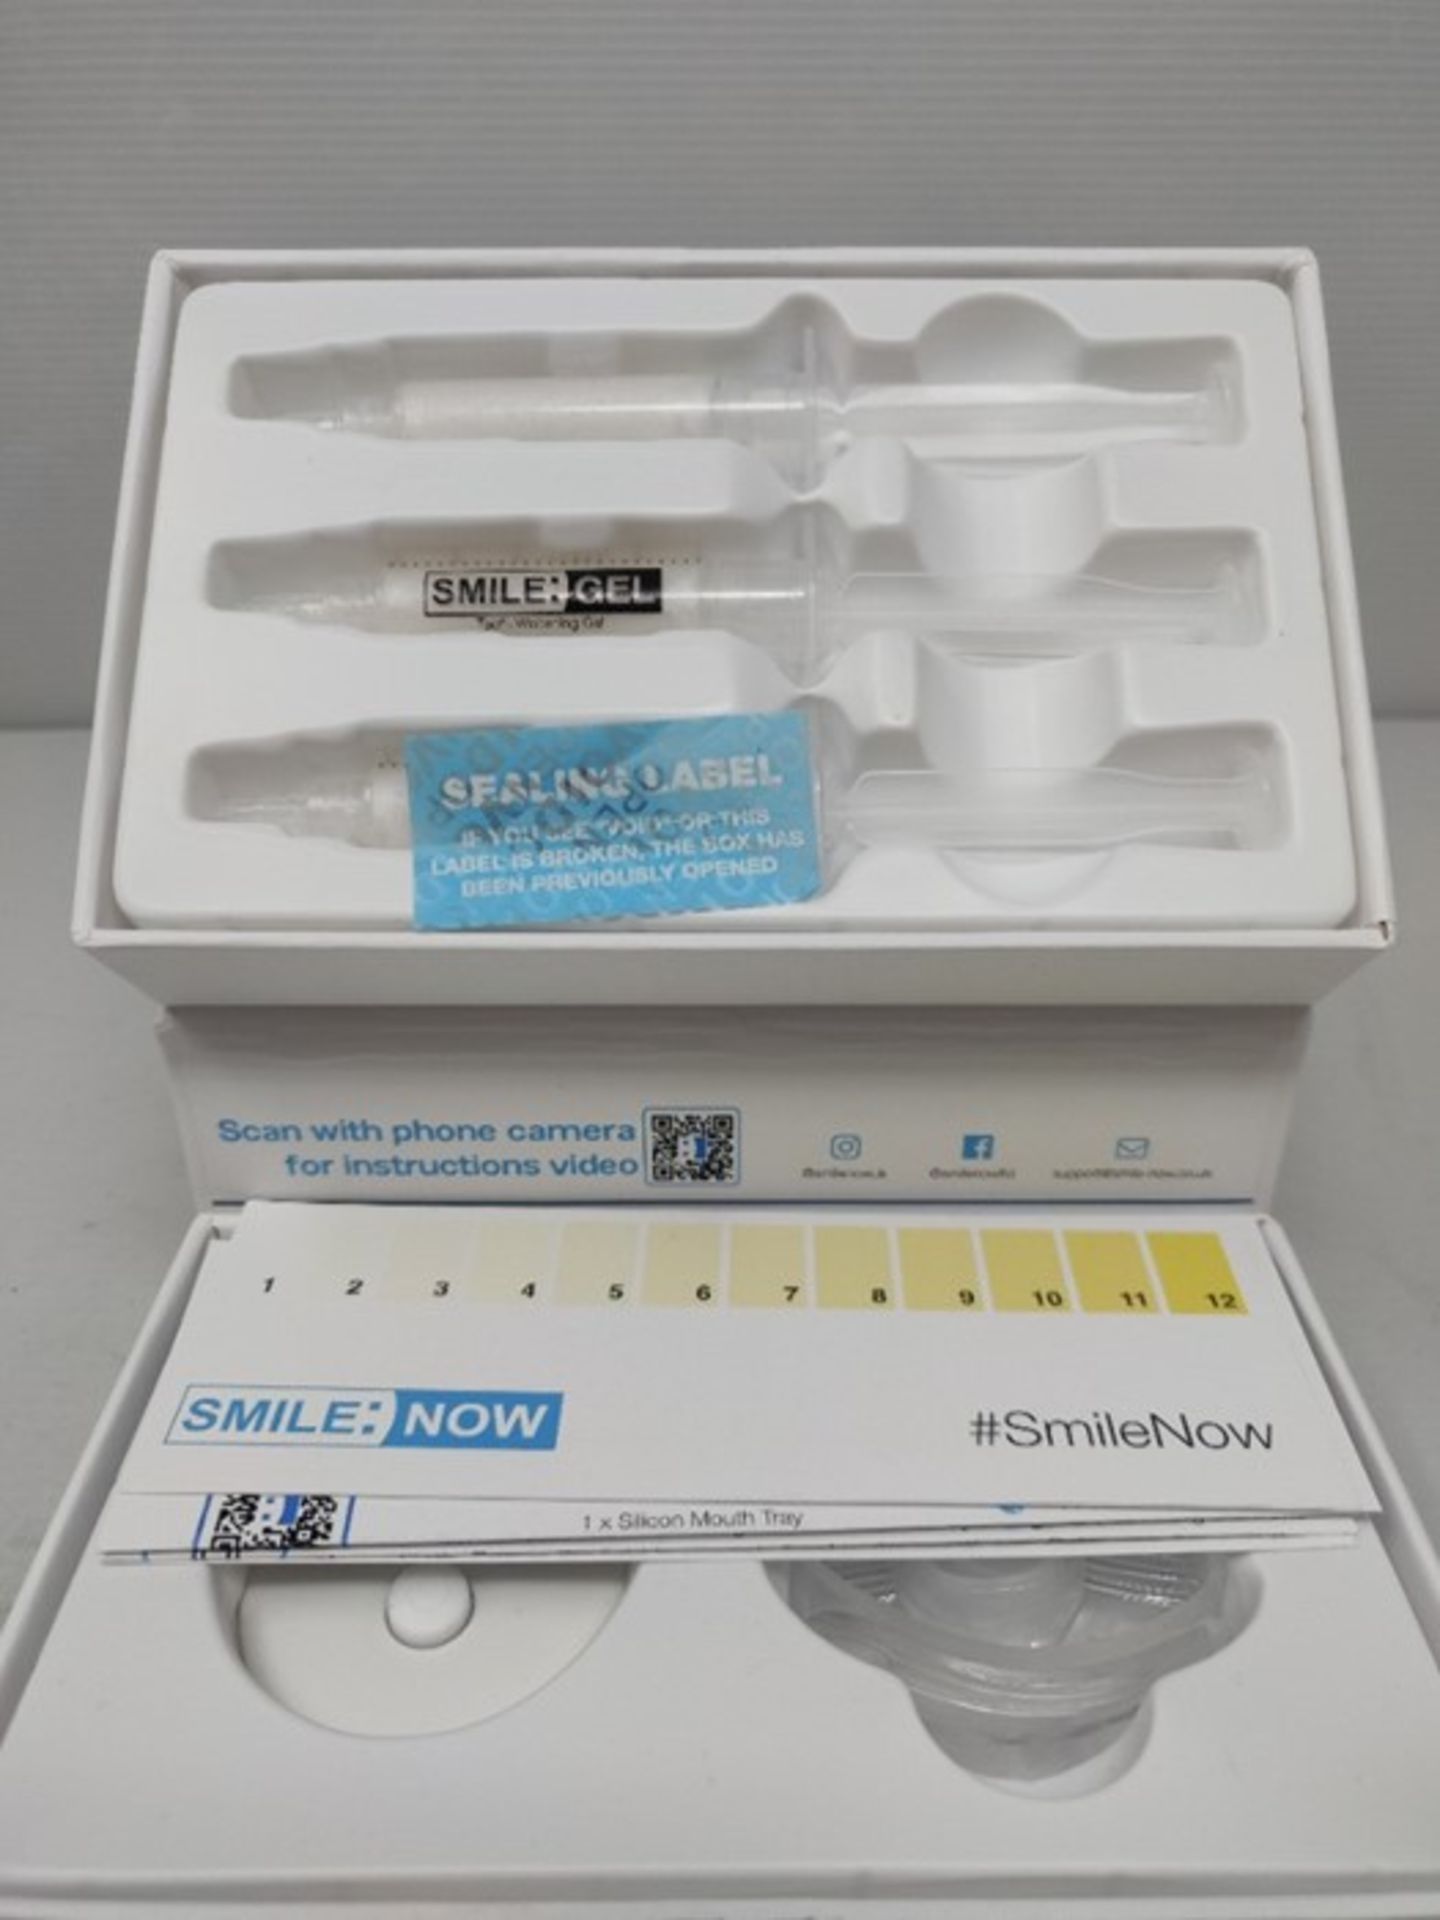 Teeth Whitening Kit - Teeth Whitener Formulated by Dentists Made in Britain - 14 Day 2 - Image 2 of 2